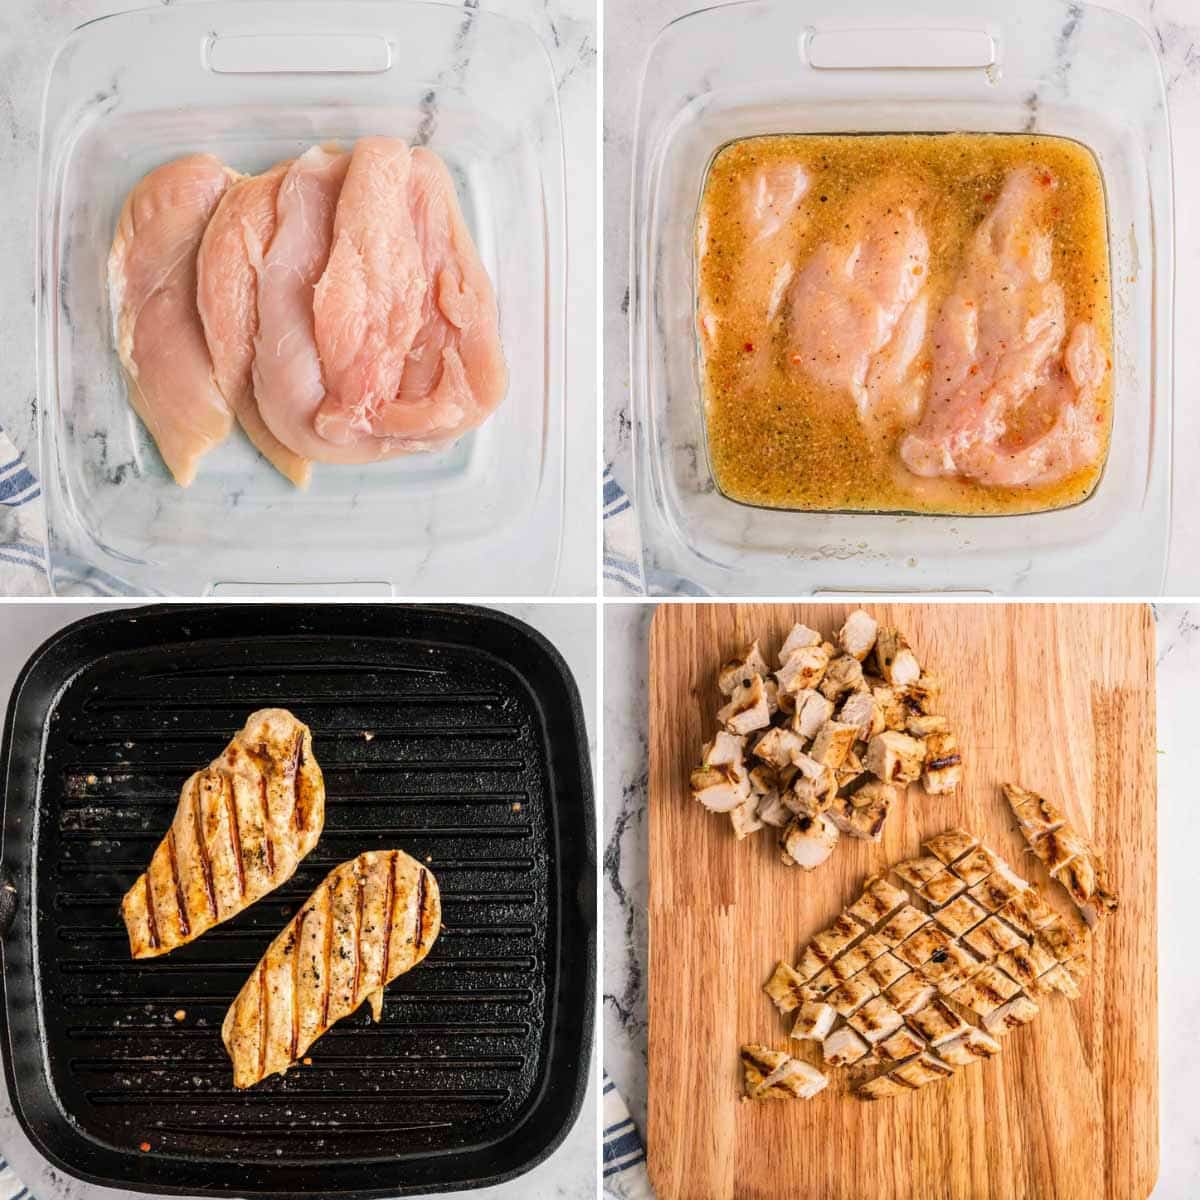 Four images showing the process of marinading chicken, cooking it, and slicing it into pieces.